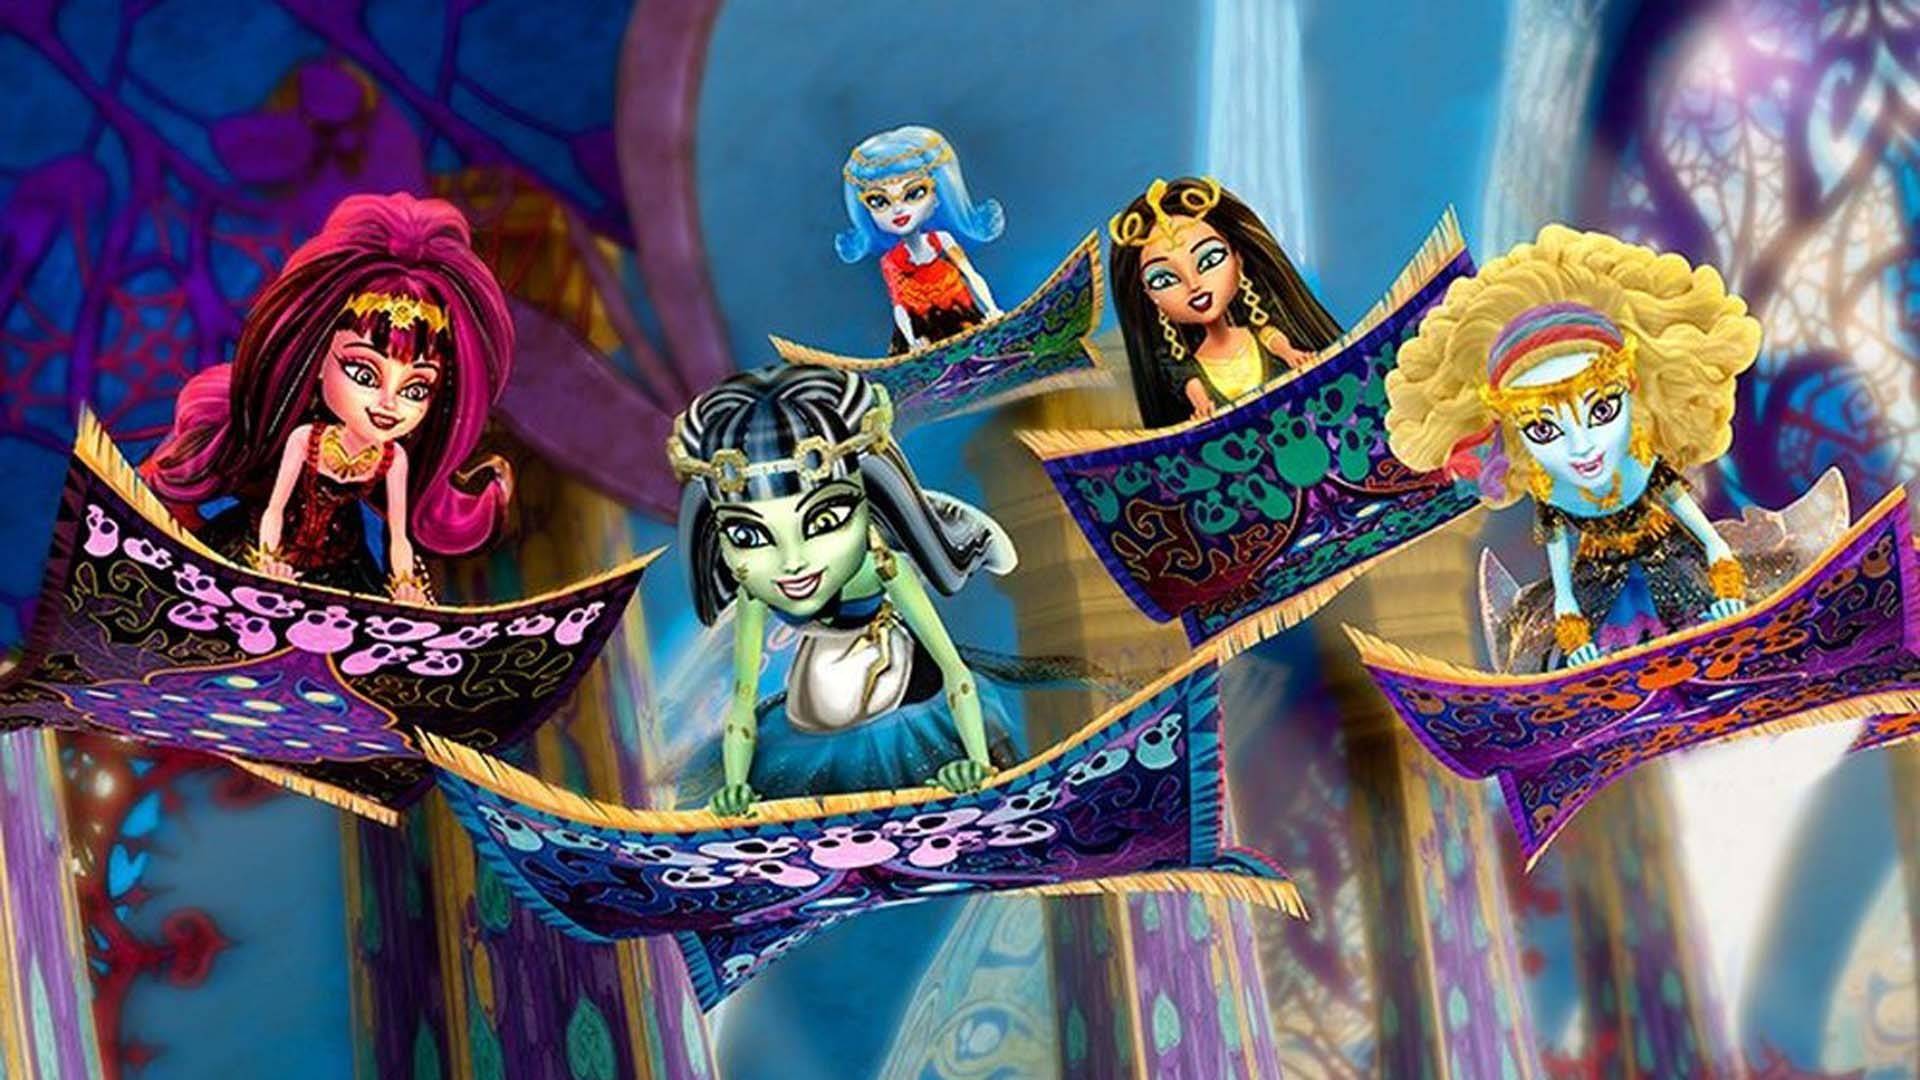 Monster High: 13 Wishes Wallpaper High: 13 Wishes Wallpaper